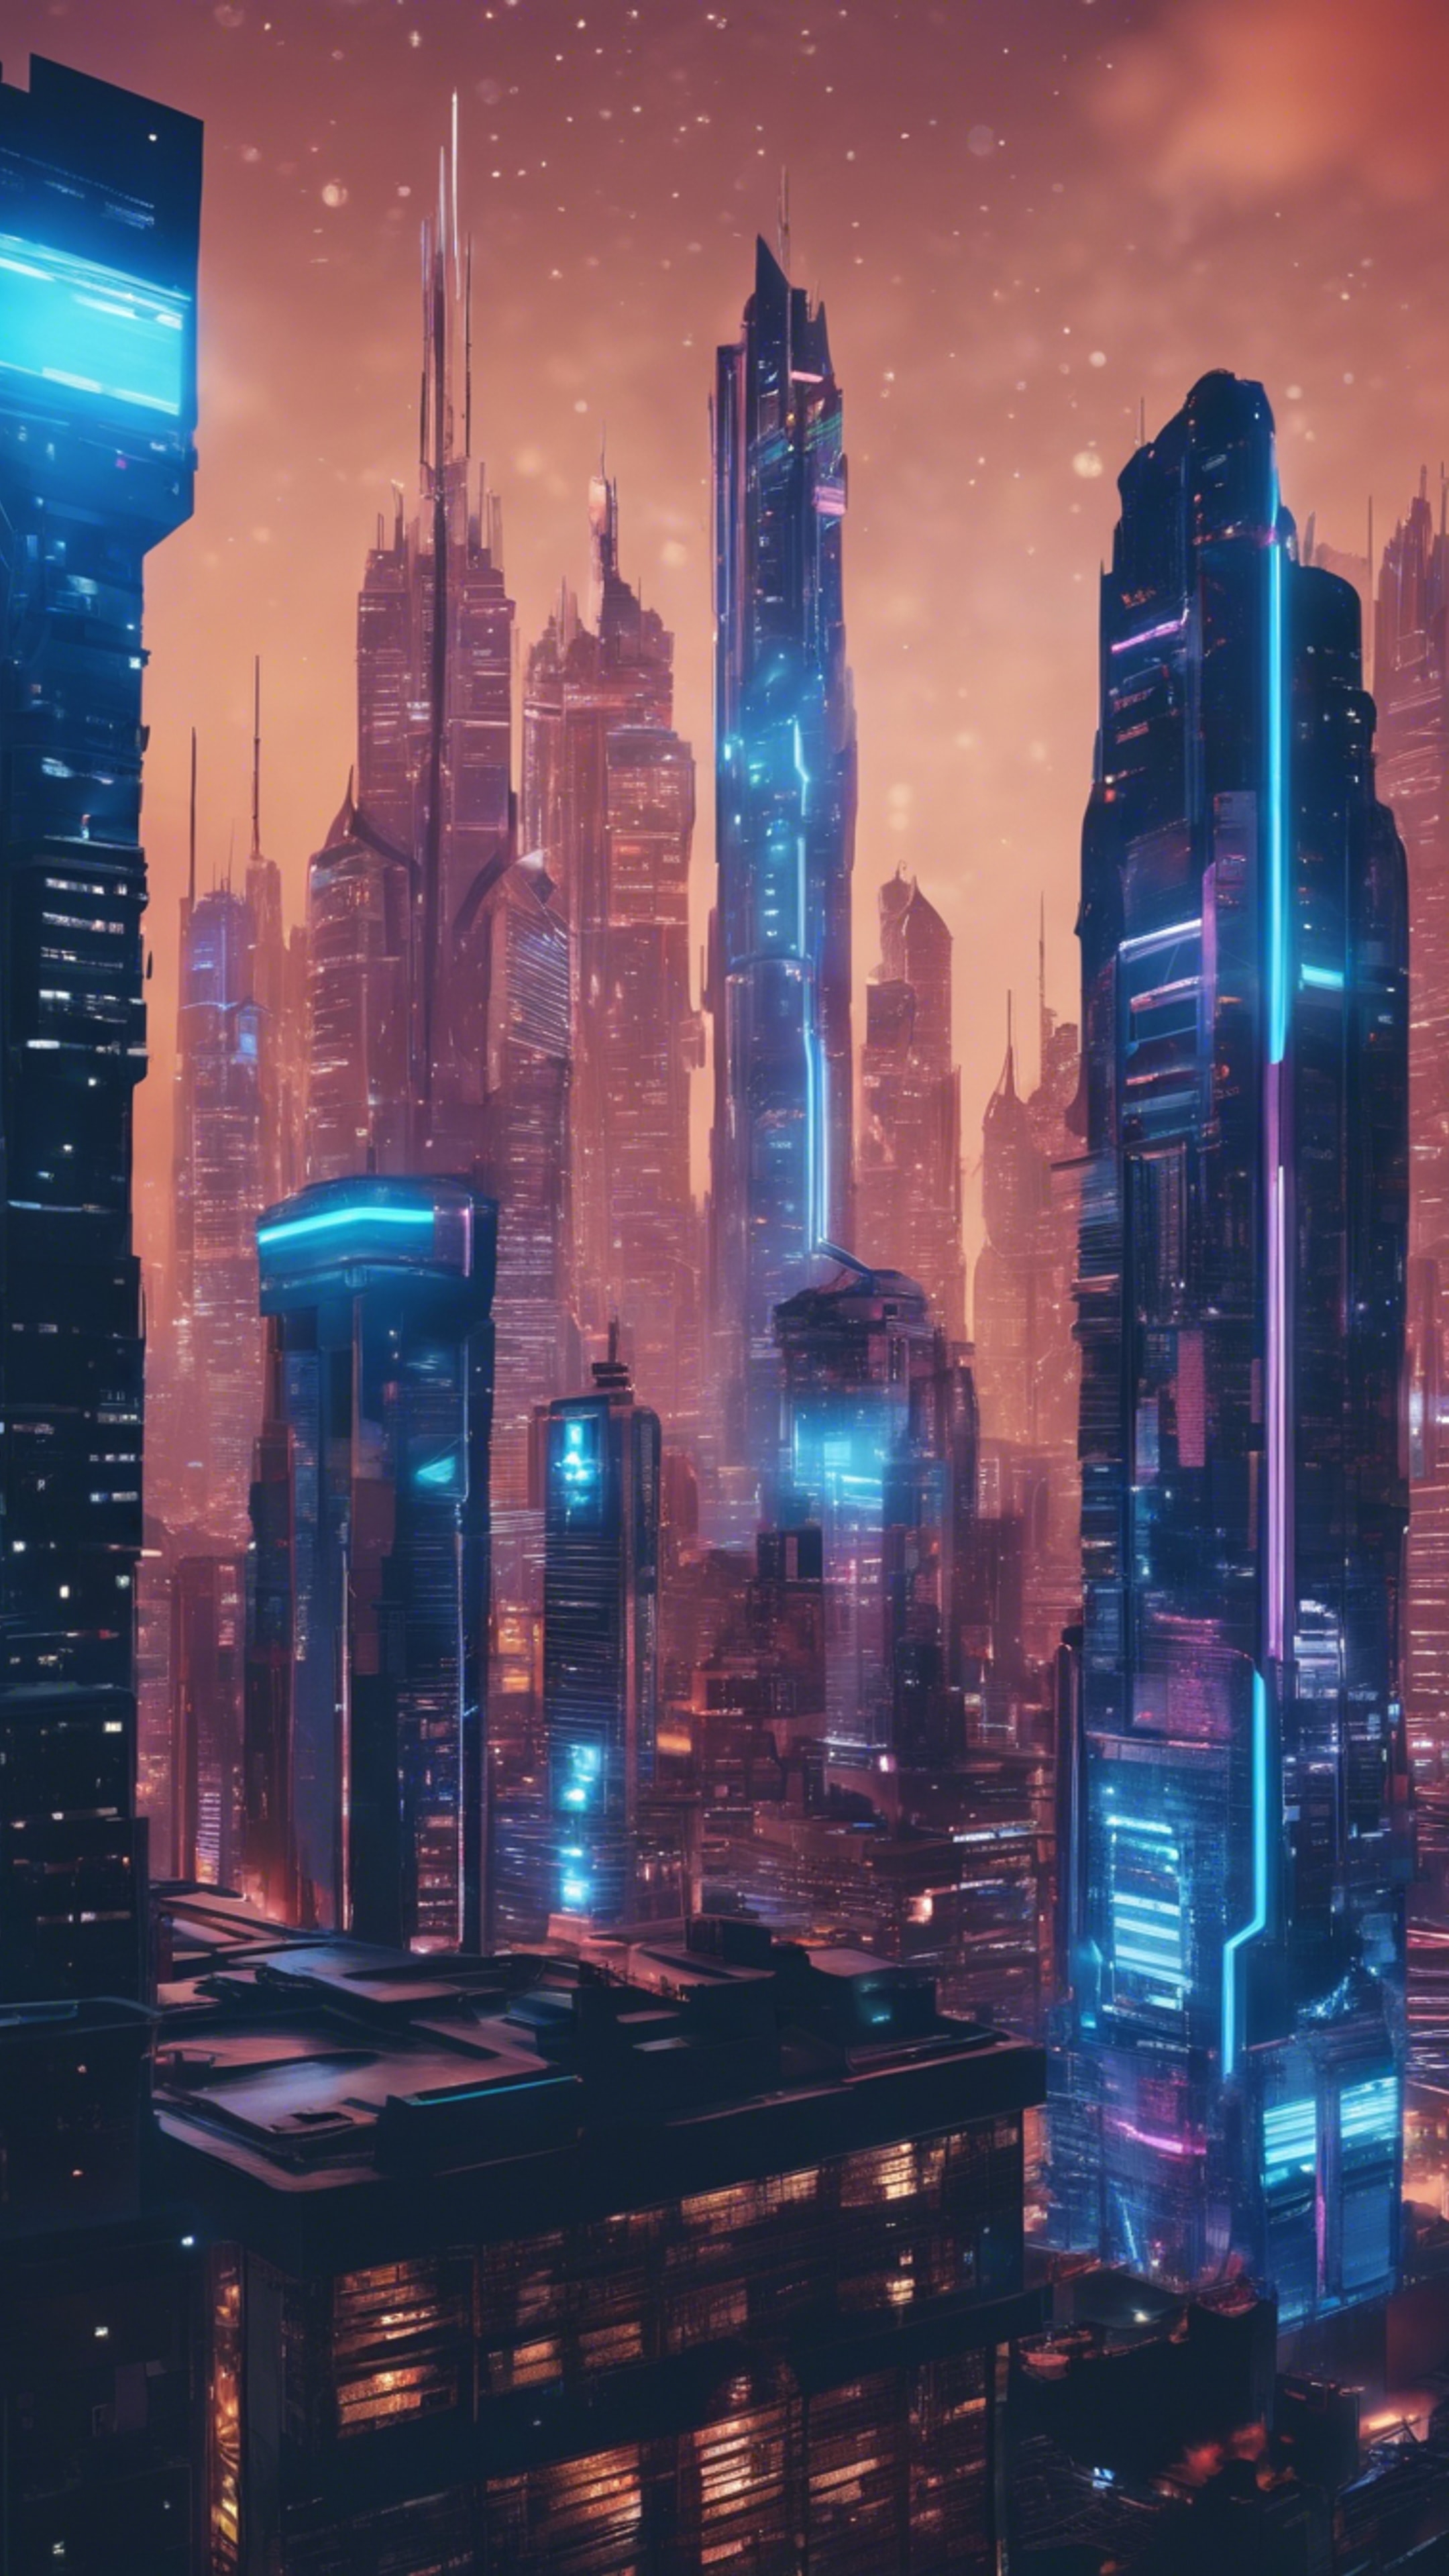 A futuristic city glowing with vibrant neon-blue lights and skyscrapers piercing the night sky. کاغذ دیواری[2f3a3bdee3e14a4e9359]